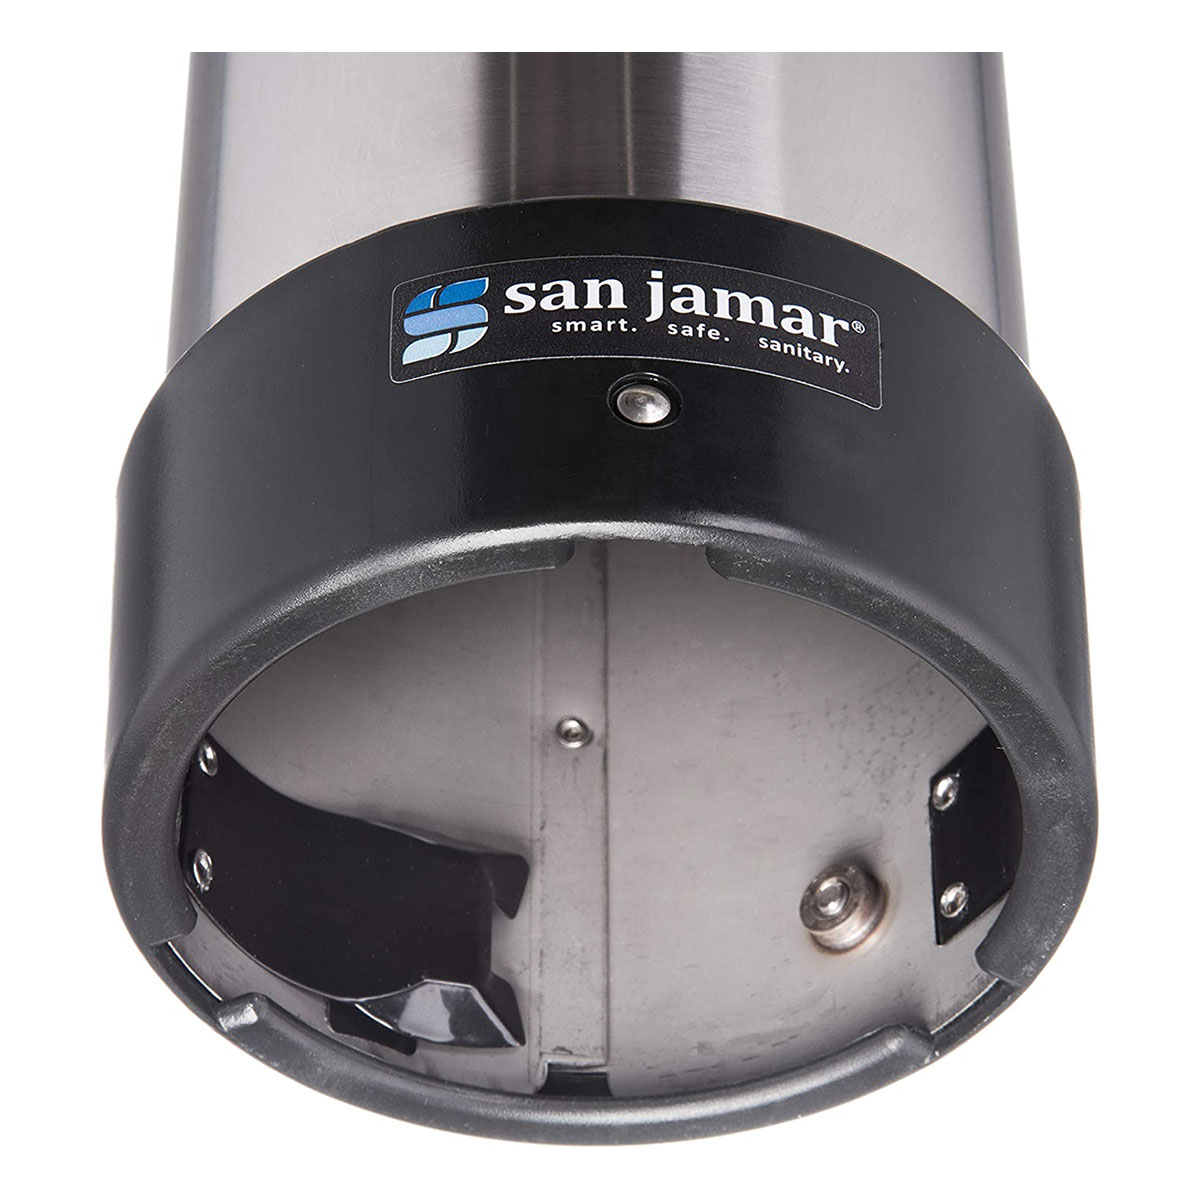 San Jamar C3400P Wall Mount Cup Dispenser for 12 to 24 Oz Cups image 1